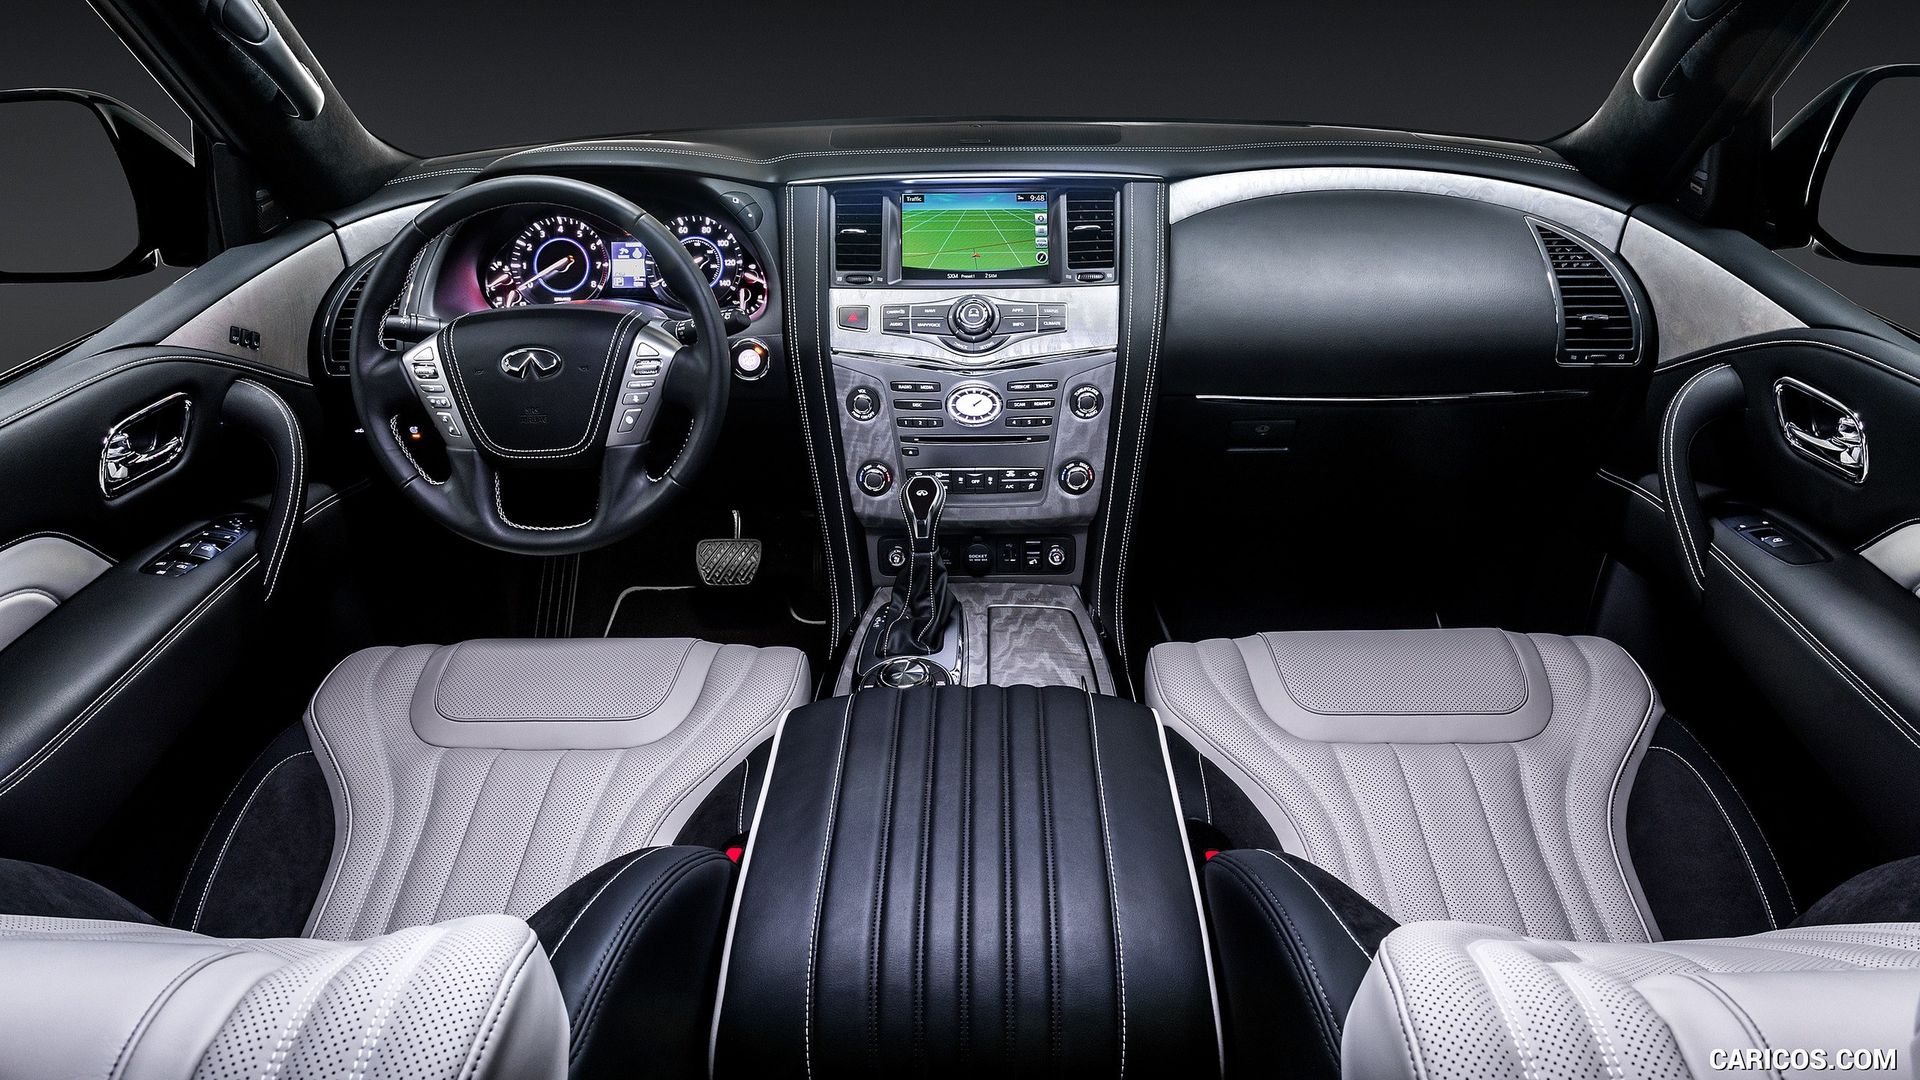 This image shows the black and gray interior of the Infiniti QX80. 